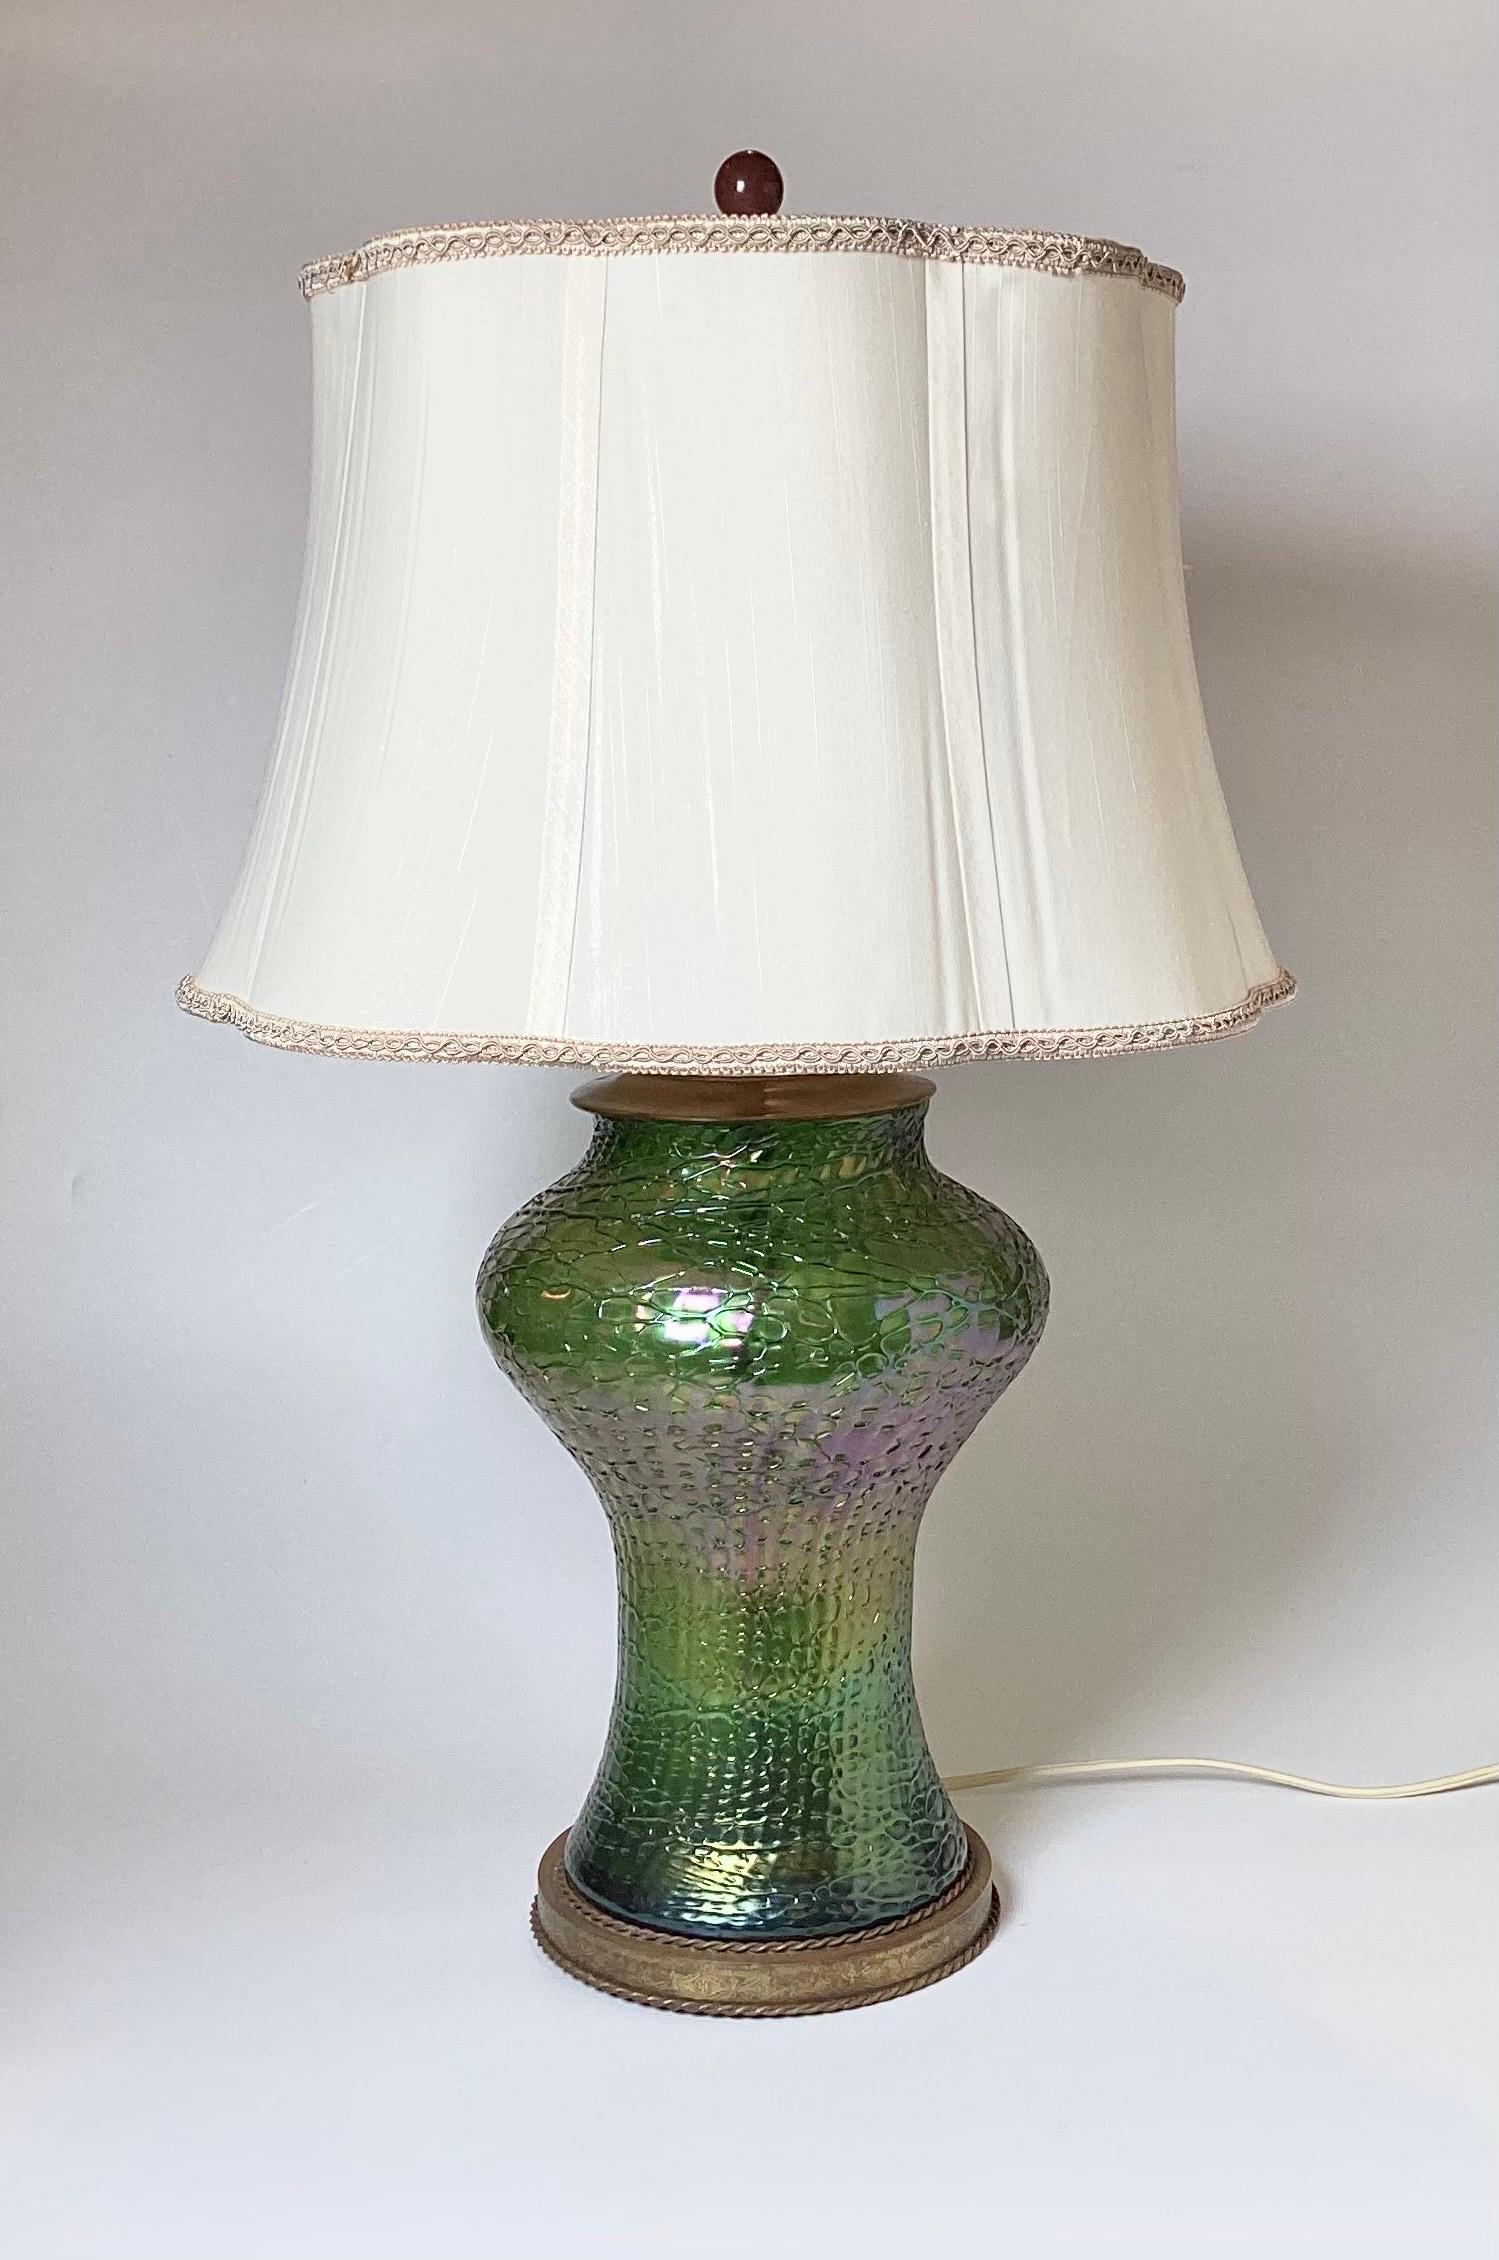 Elegant hand blown iridescent green glass lamp with la ficelle surface. The shapely body with green background with an overlay web effect on the surface. The top and bottom with naturally aged brass patinated mounts. The lamp with two sockets, one